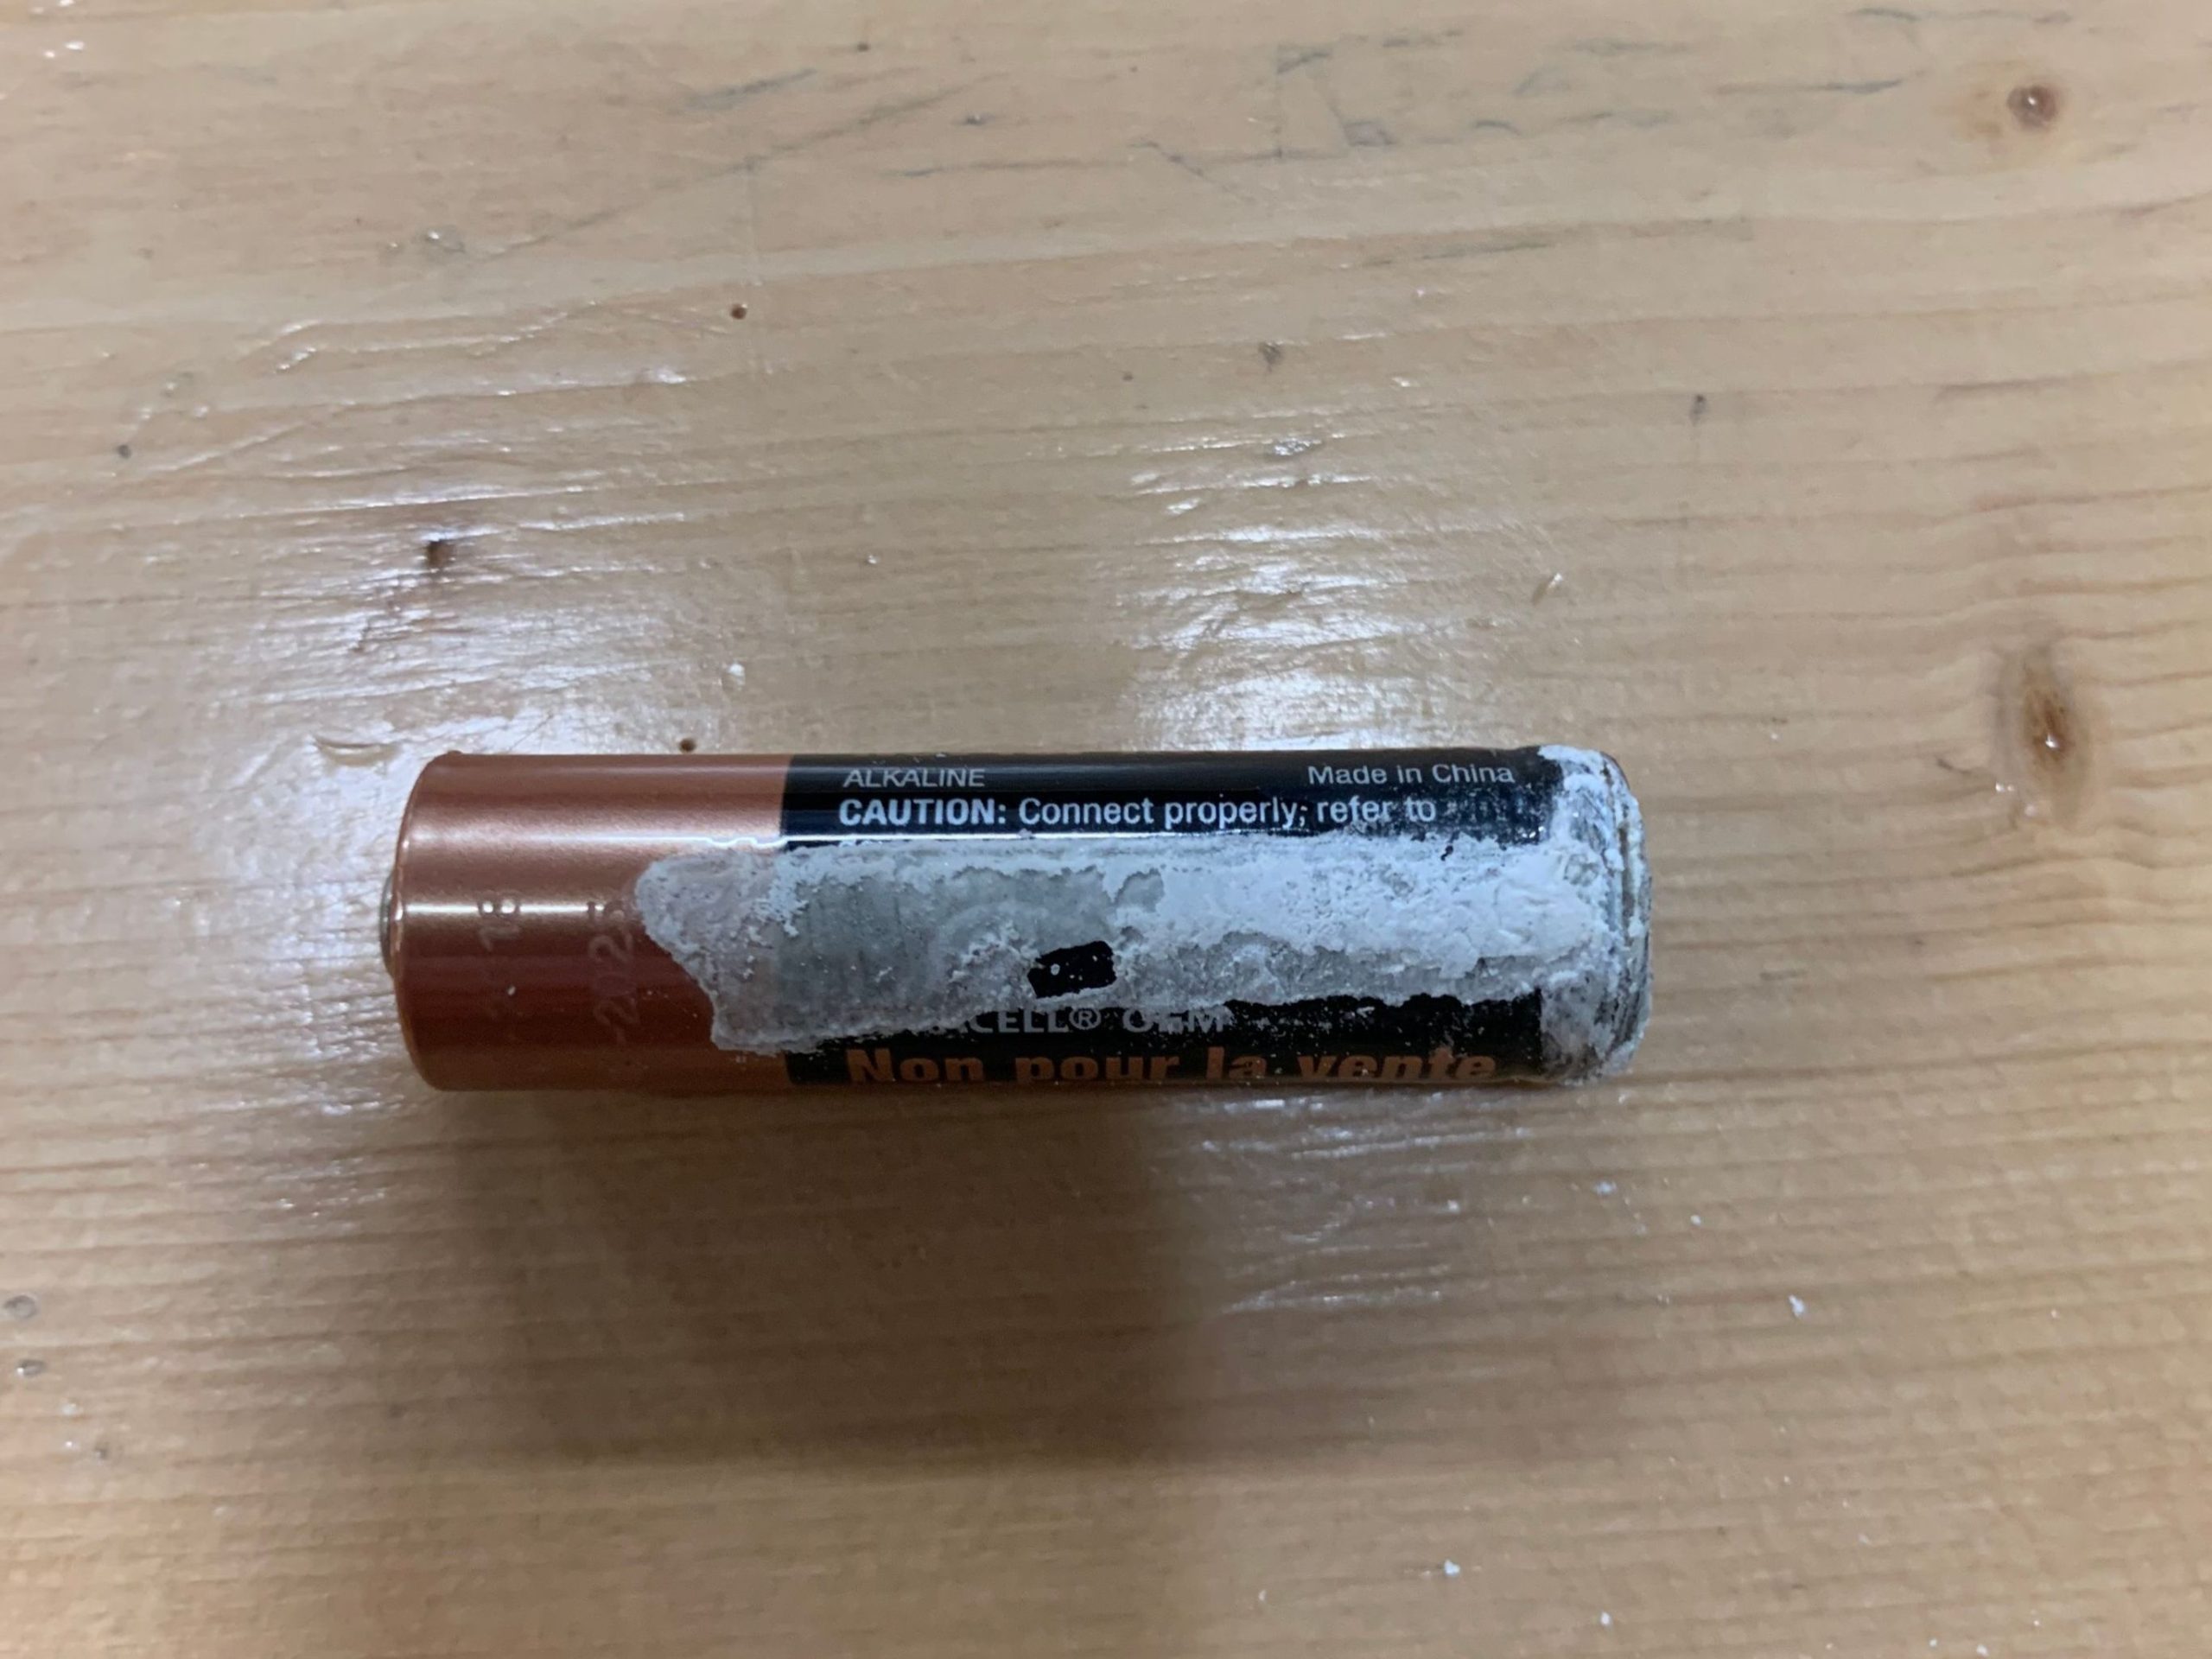 An old AA battery that has leaked.